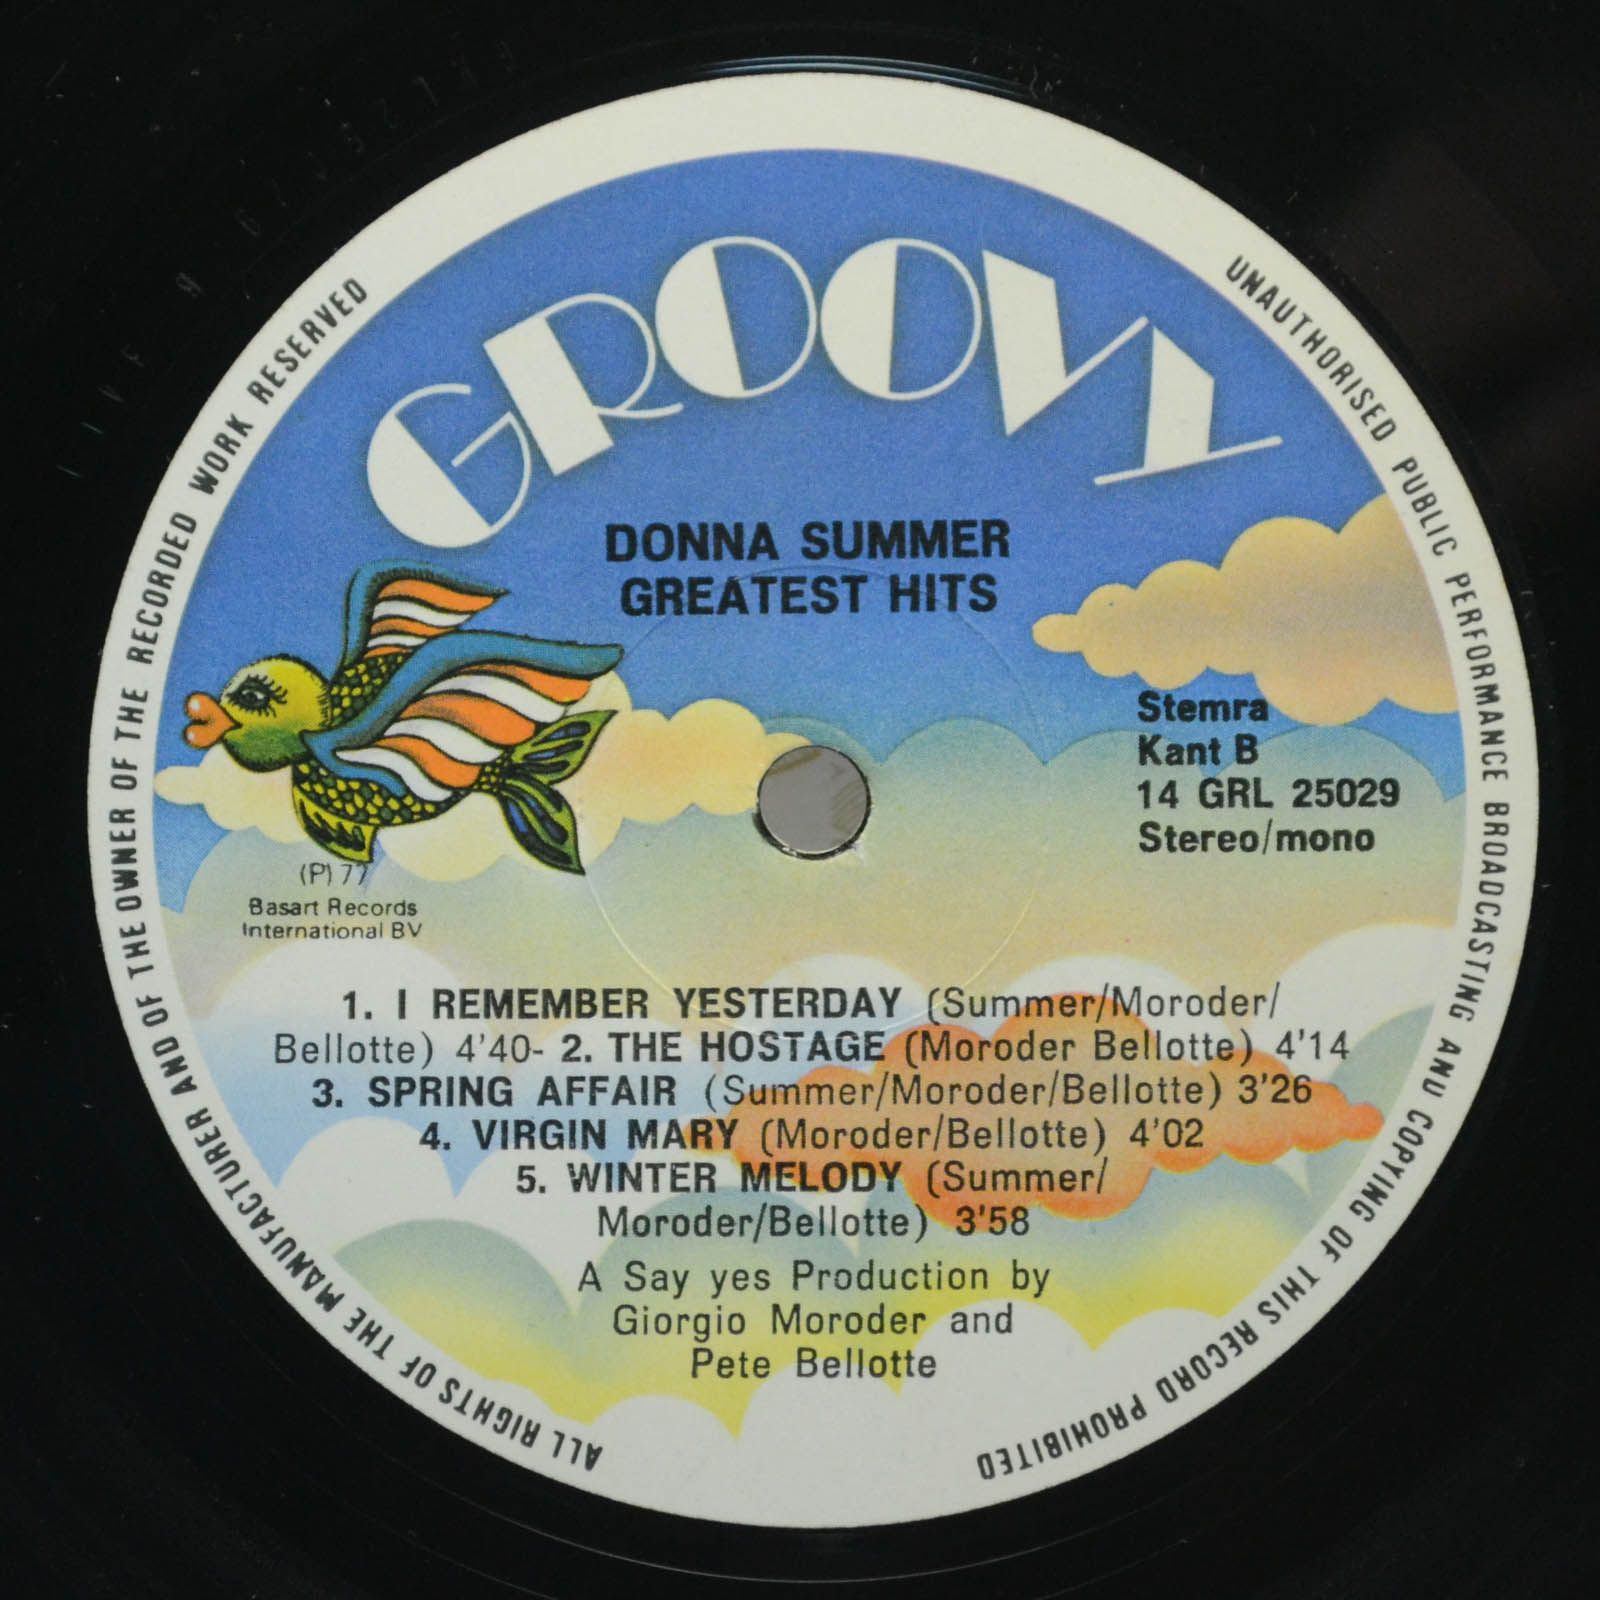 Donna Summer — Greatest Hits, 1977